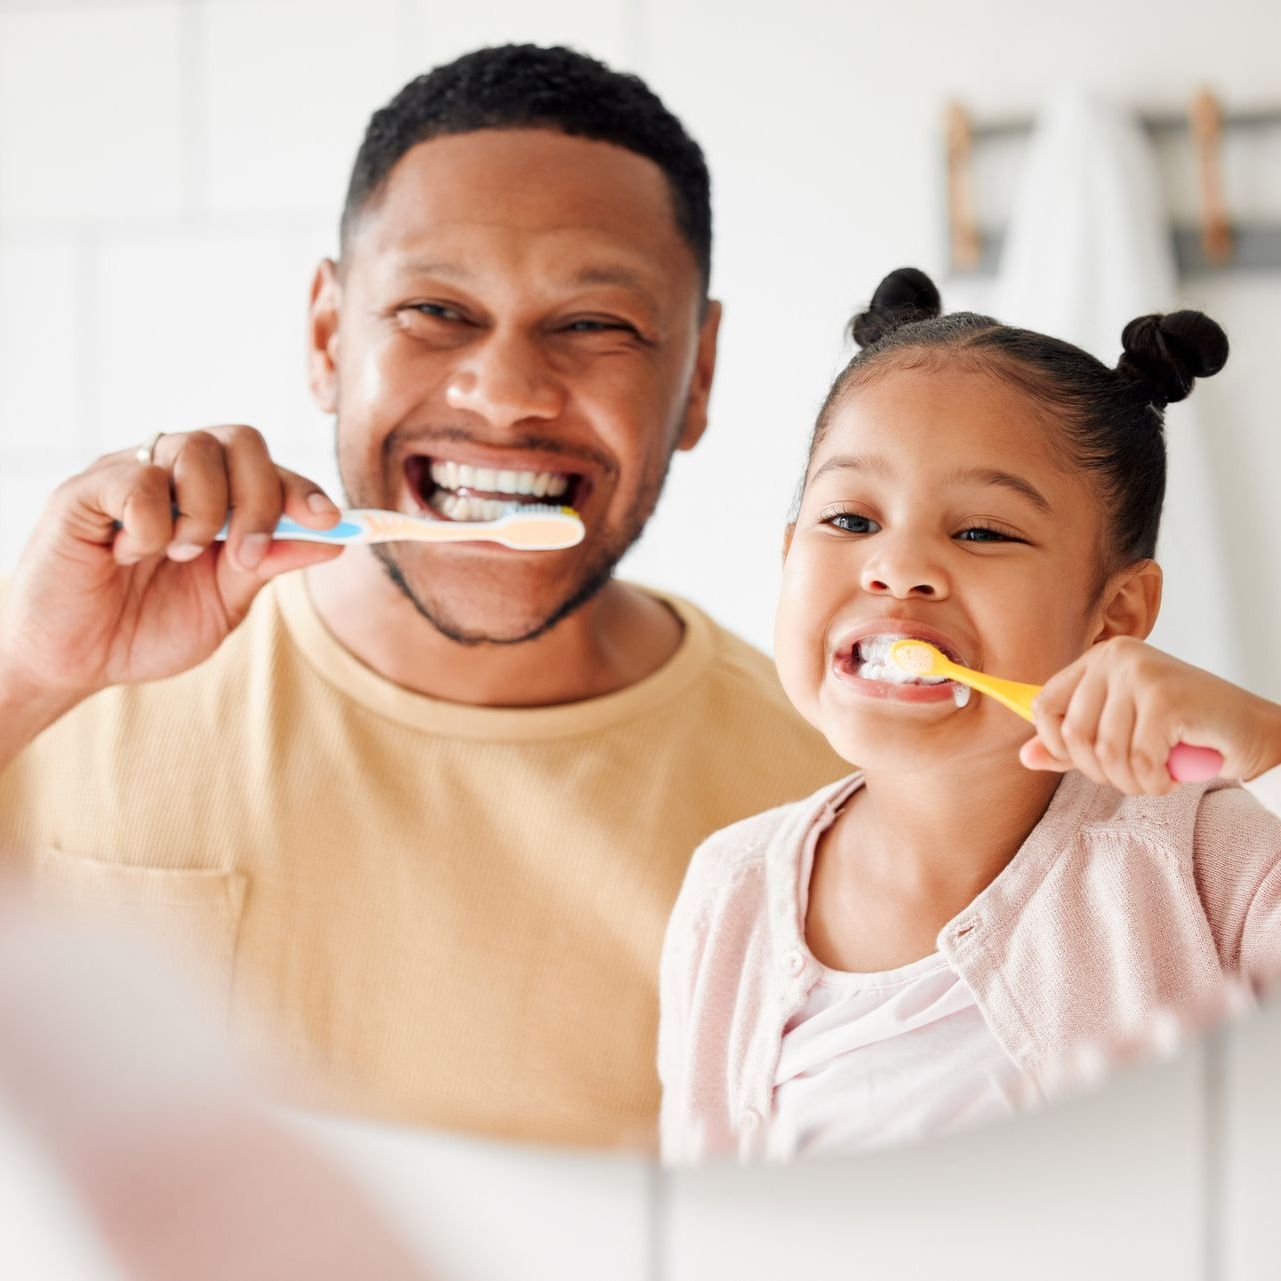 A man and a little girl are brushing their teeth in front of a mirror.